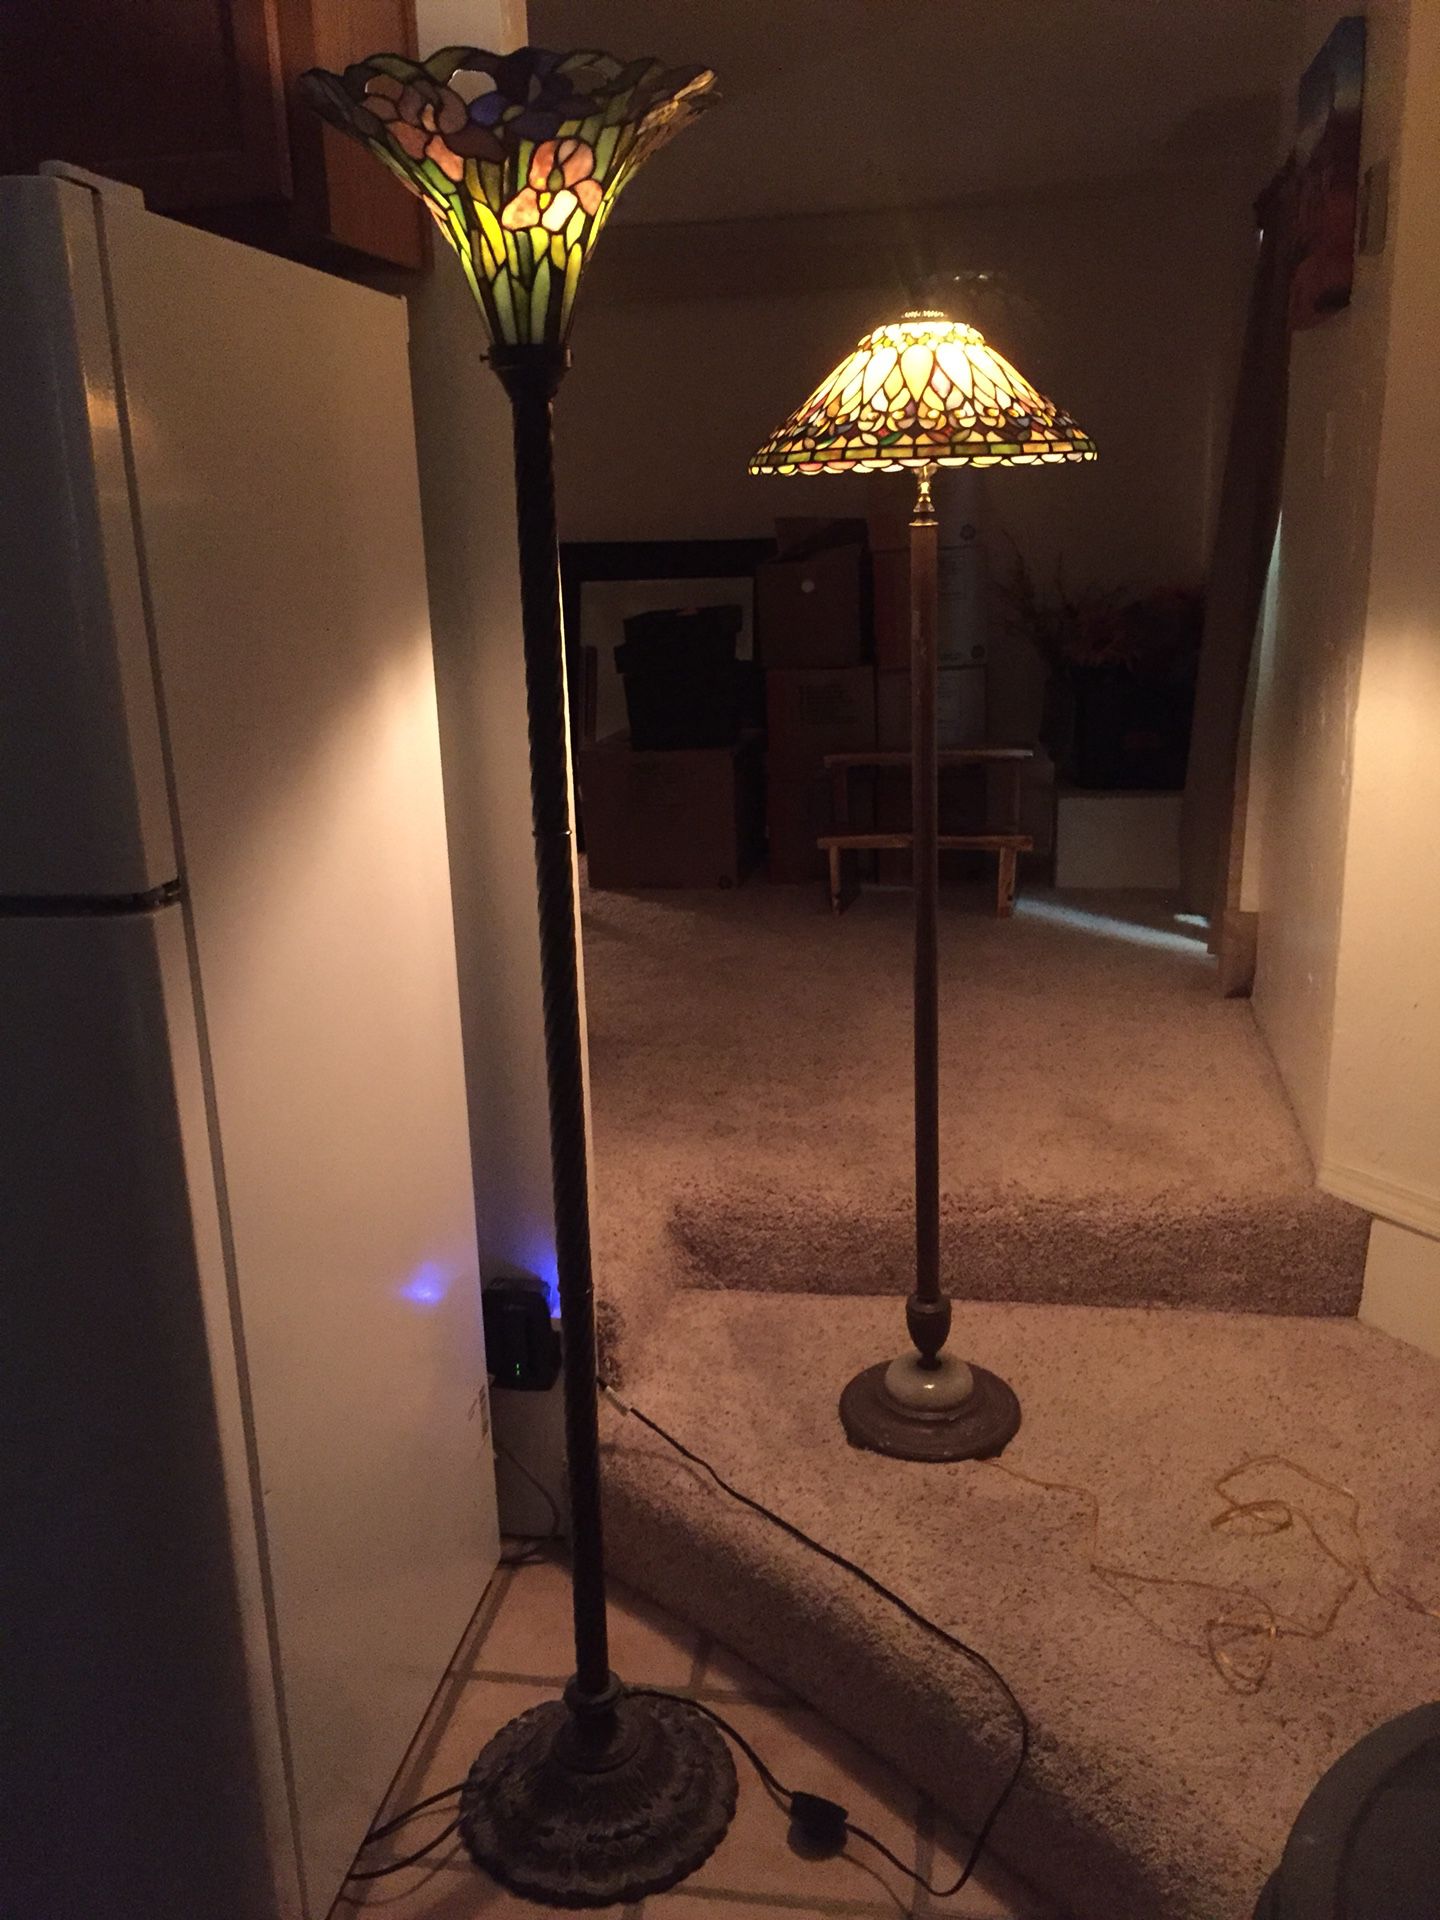 Two Tiffany style lamps